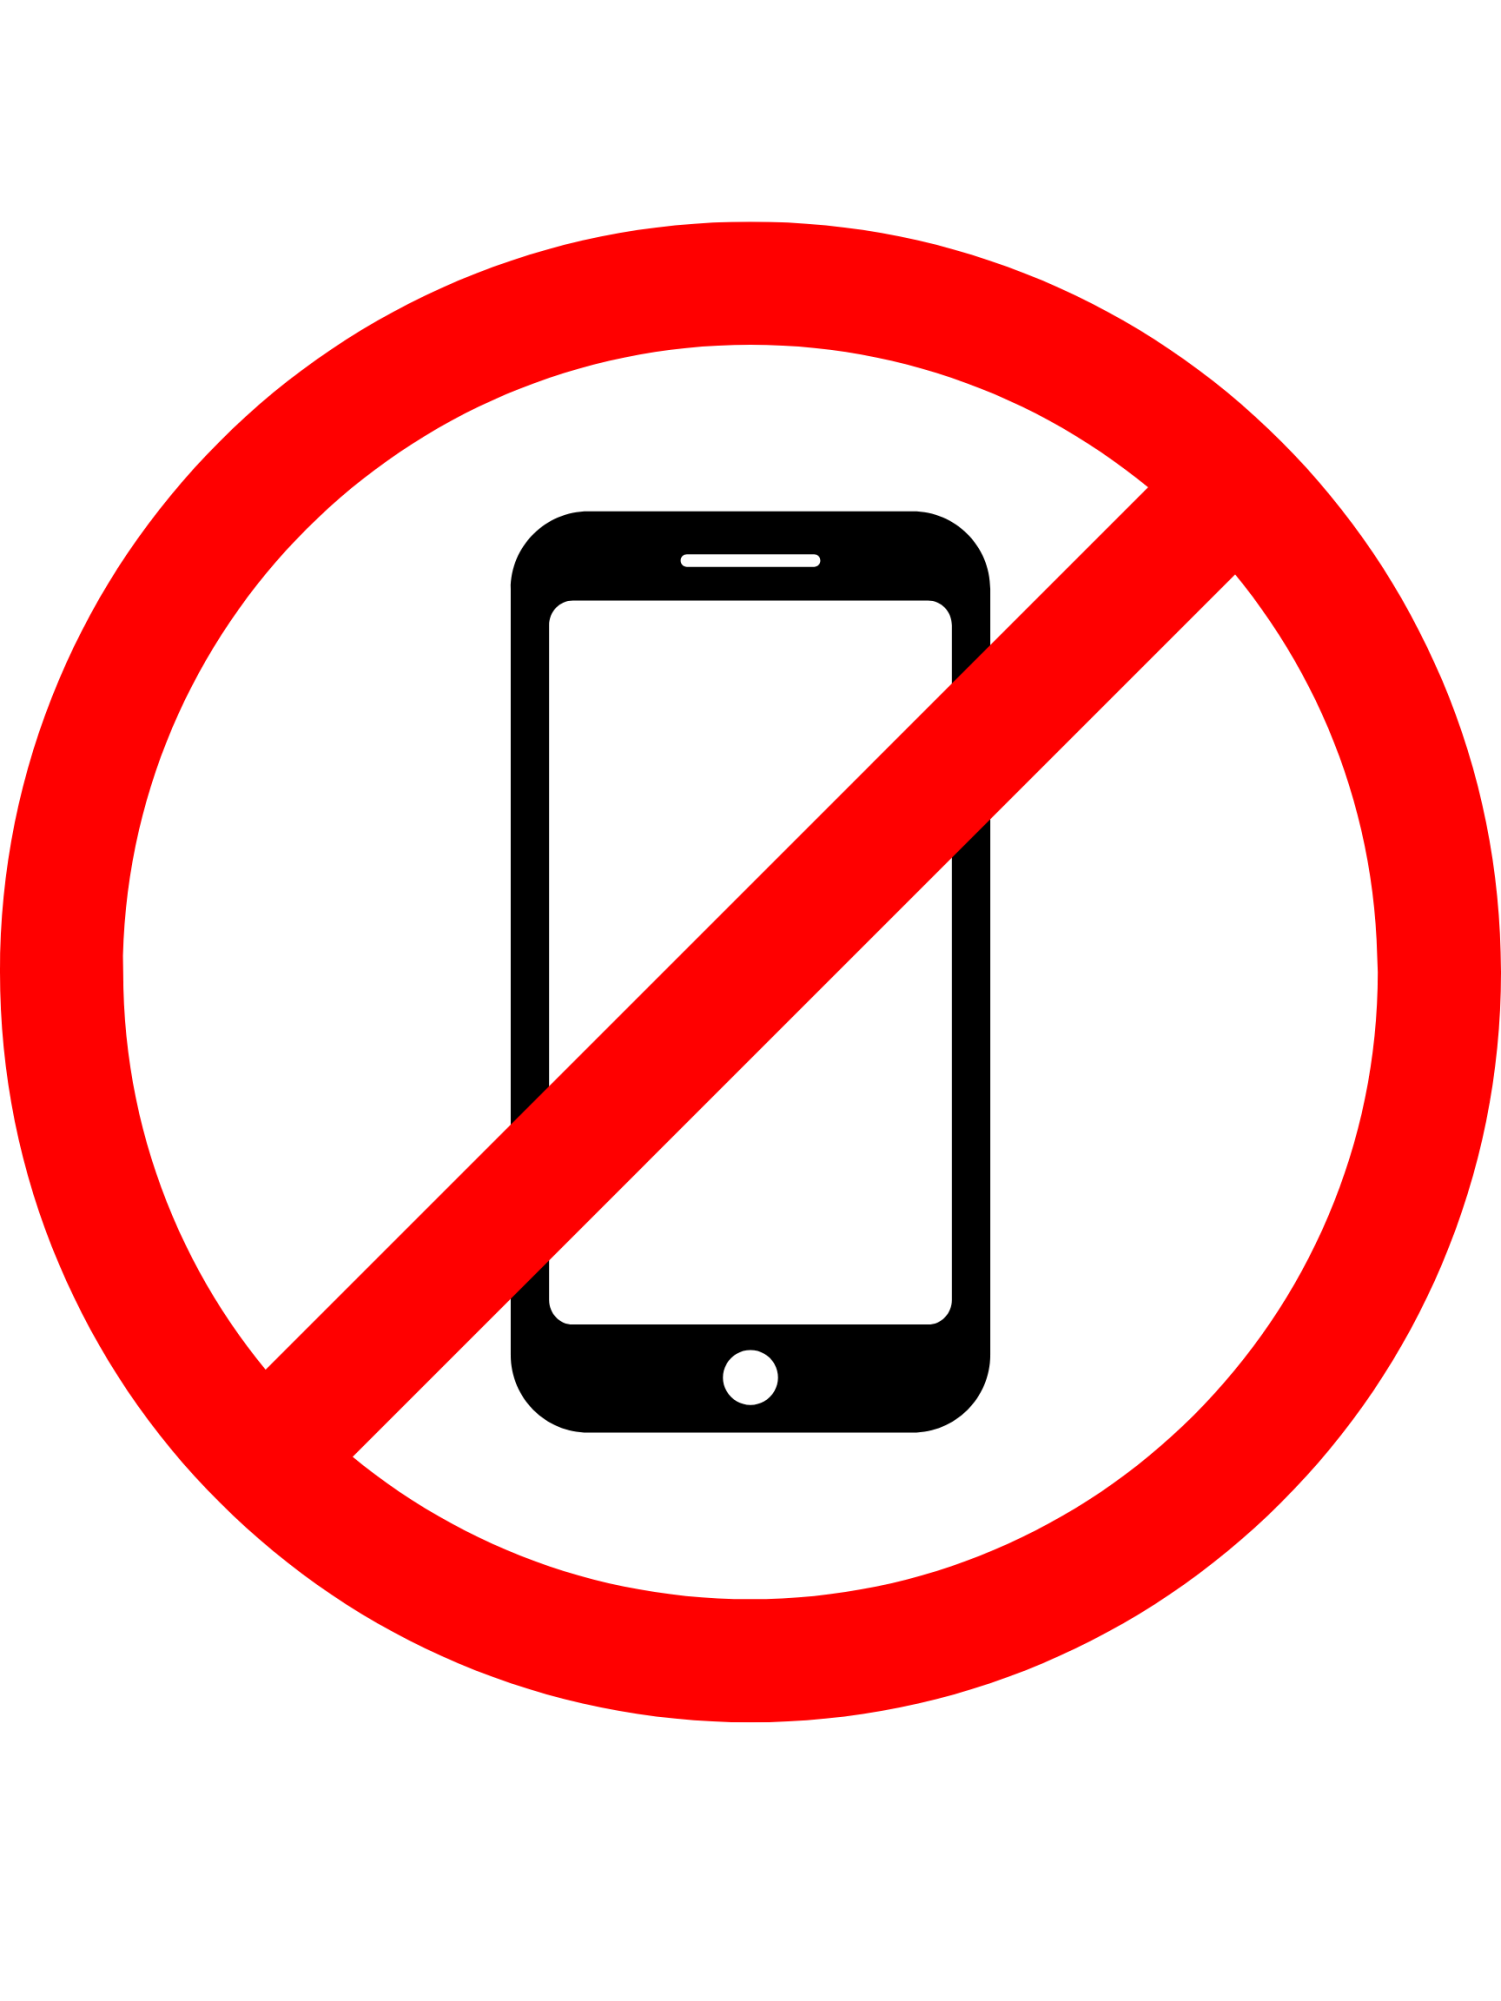 Senate Act Bill 185 will remove all communication devices. Forcing schools to come up with new policies.